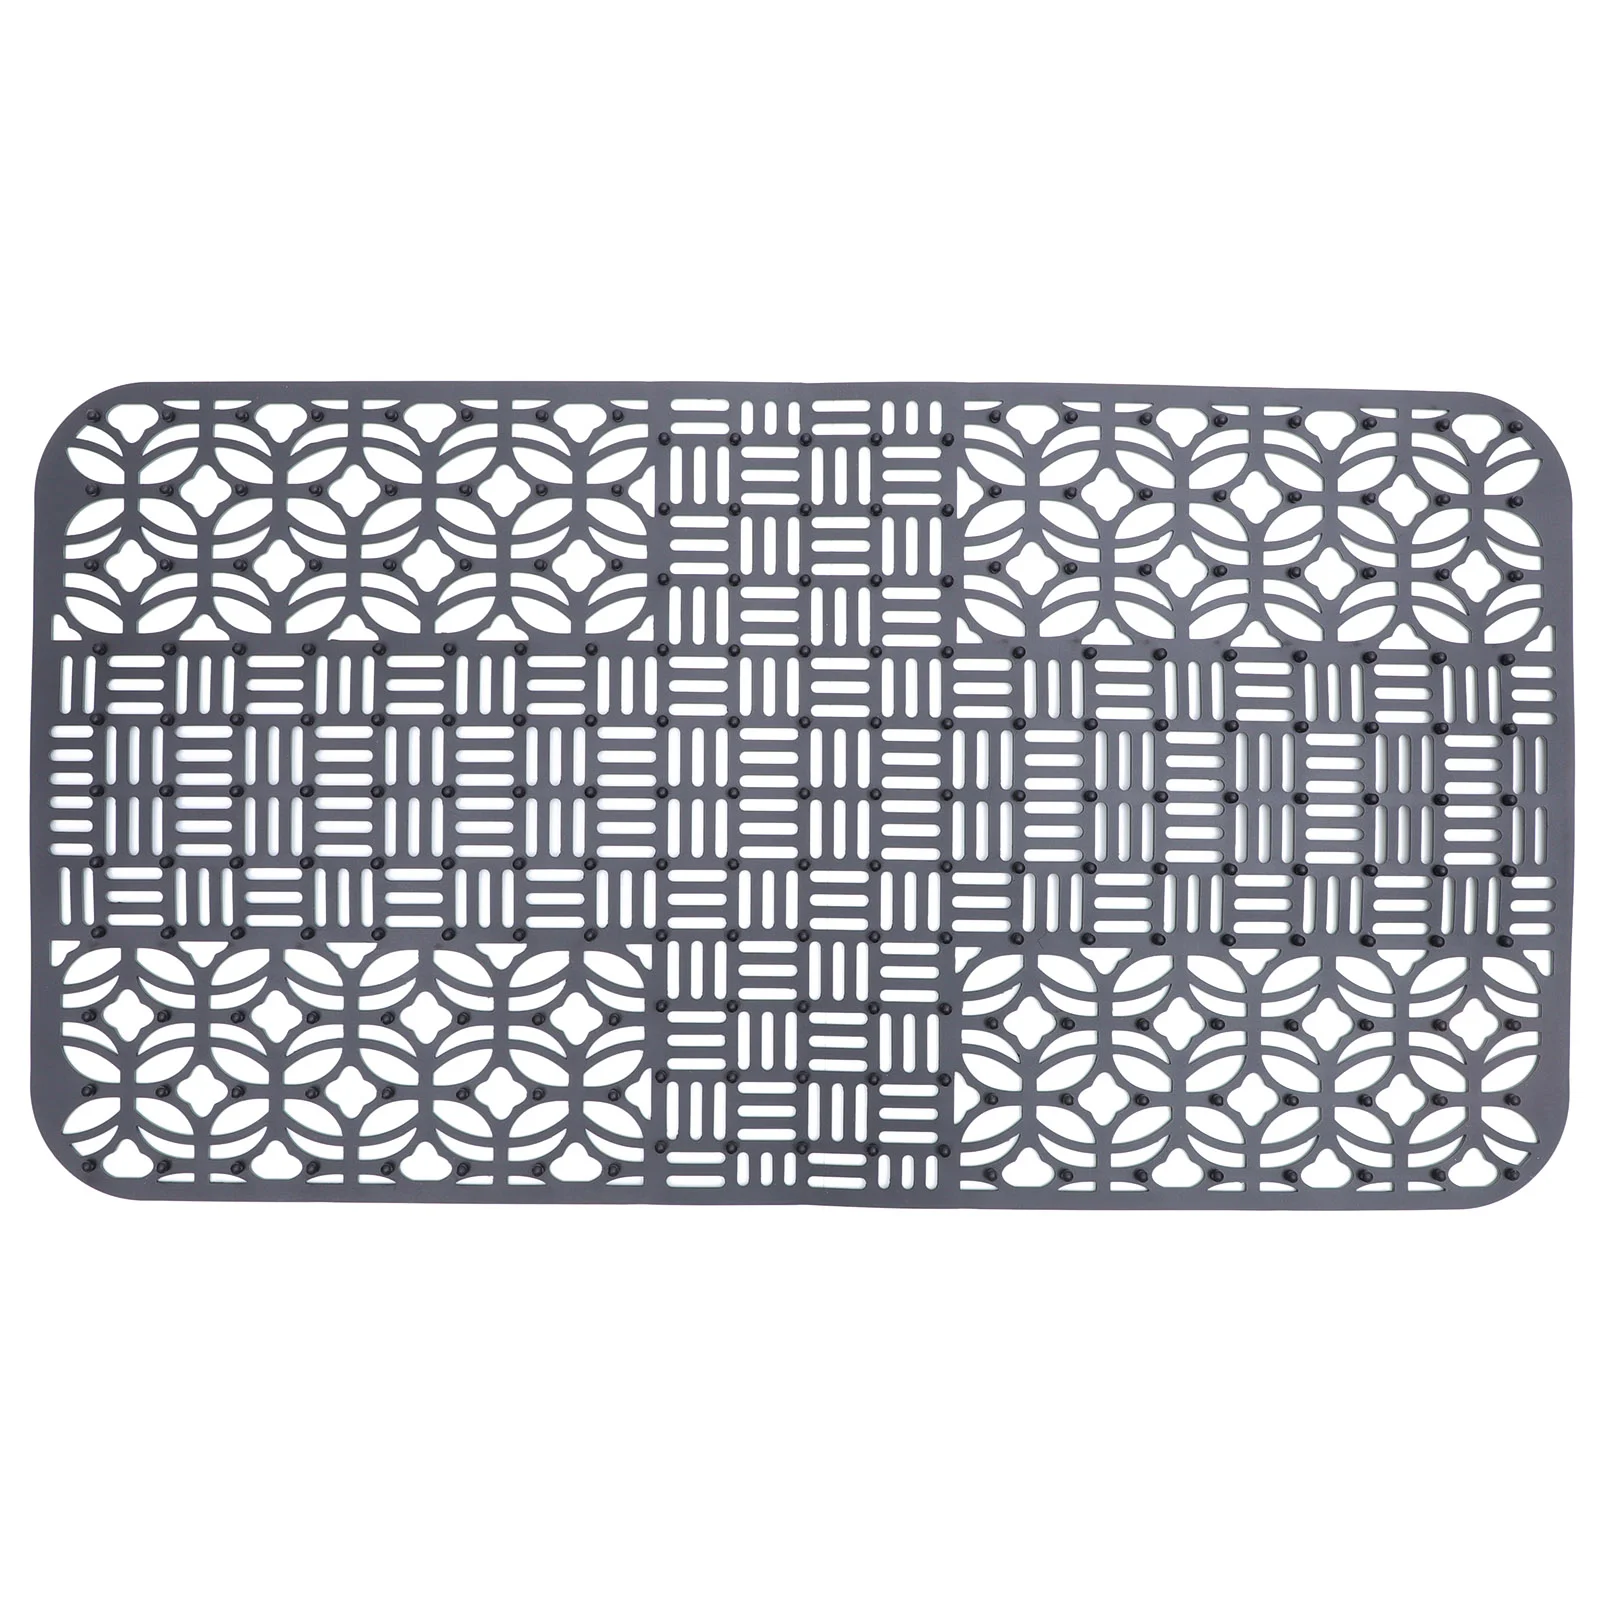 

Sink Drain Mat Silicon Stainless Steel Protector Protectors under Kitchen Silicone Mats Scratch Proof